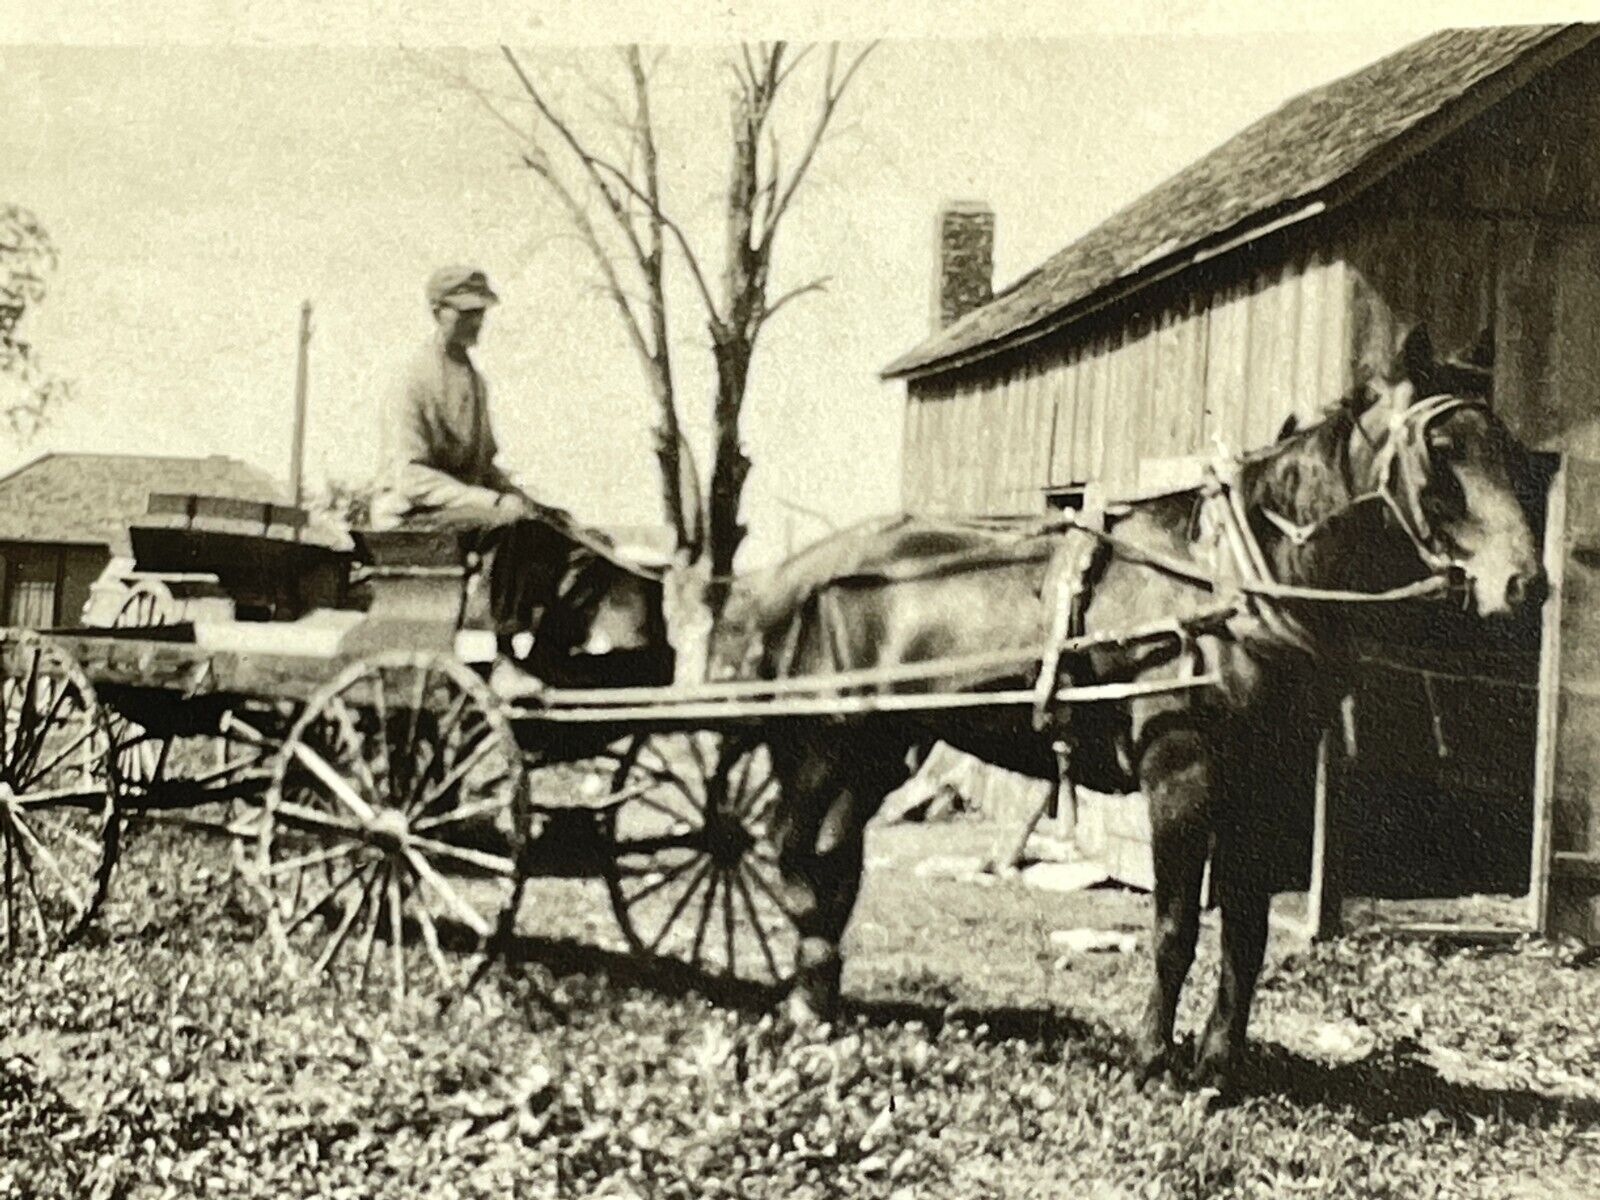 O8 Photograph Artistic Horse And Carriage Barn Farm Country 1910-20's 